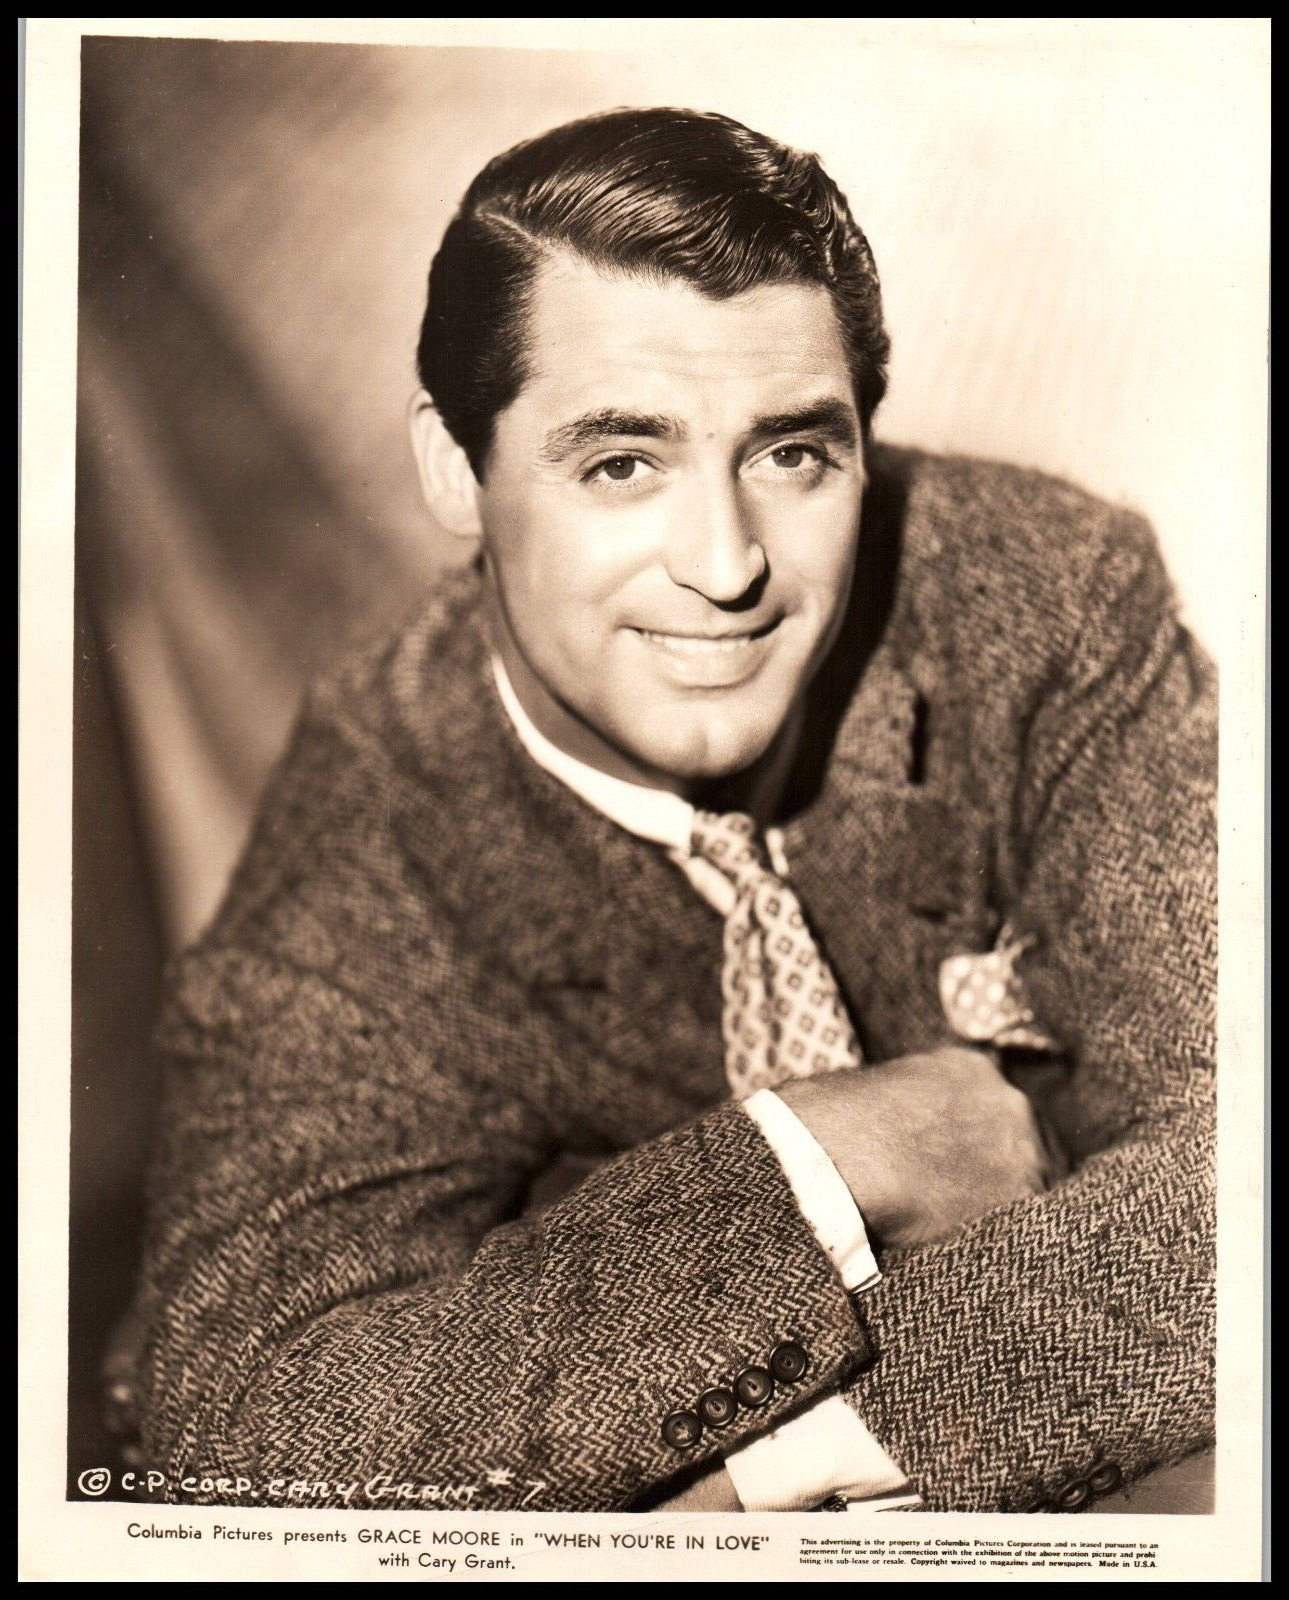 Hollywood HANDSOME ACTOR CARY GRANT PORTRAIT 1930s STYLISH POSE  Photo 756